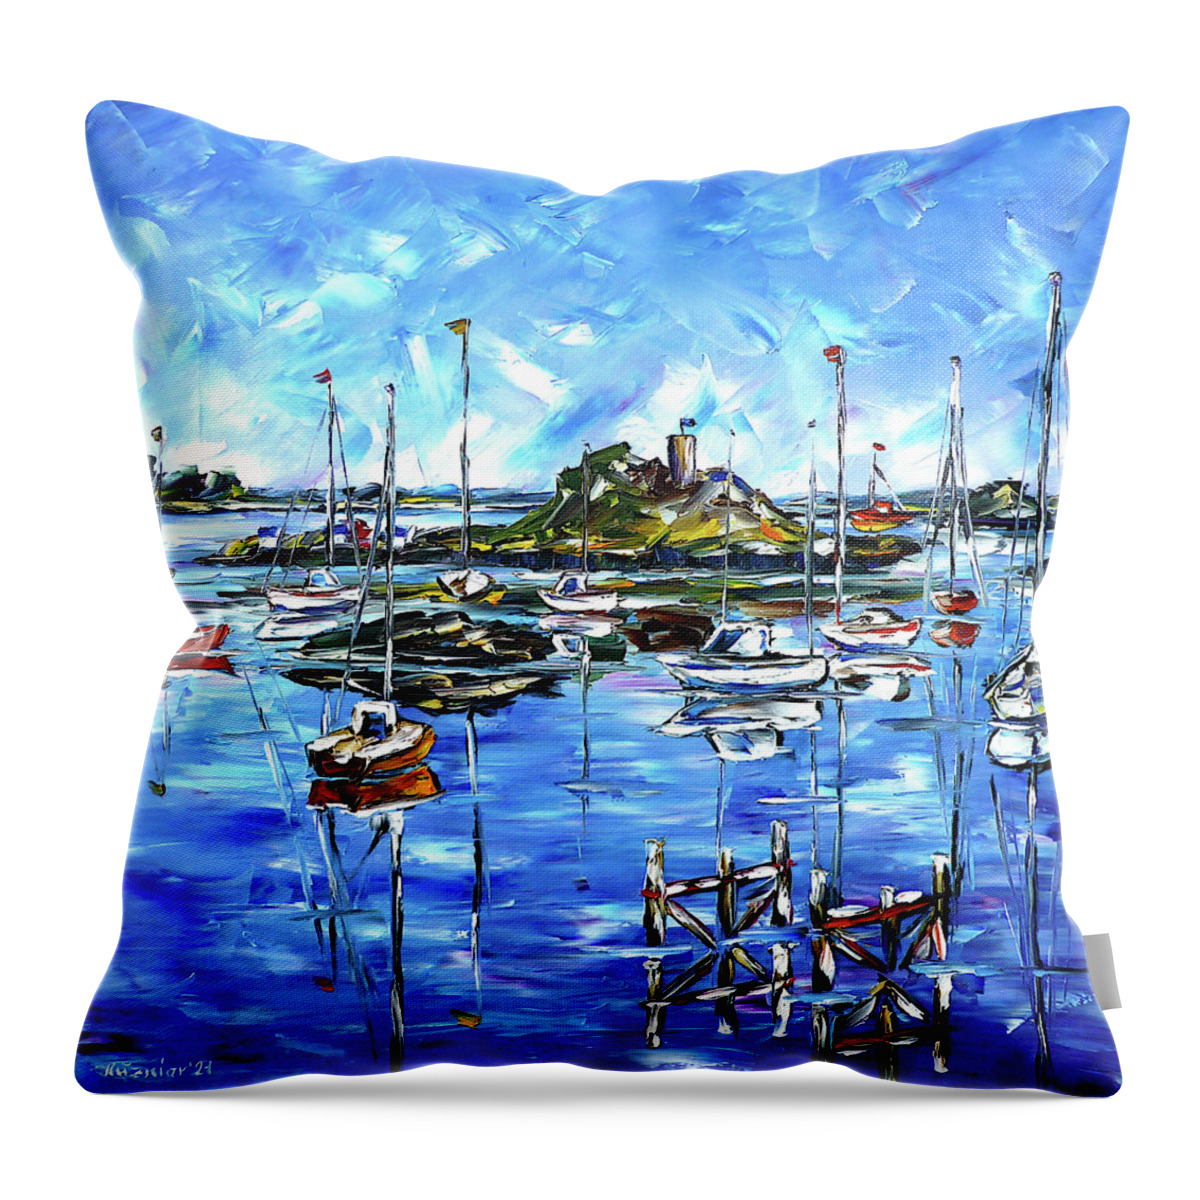 Harbor Scene Throw Pillow featuring the painting Off The Coasts Of Brittany by Mirek Kuzniar